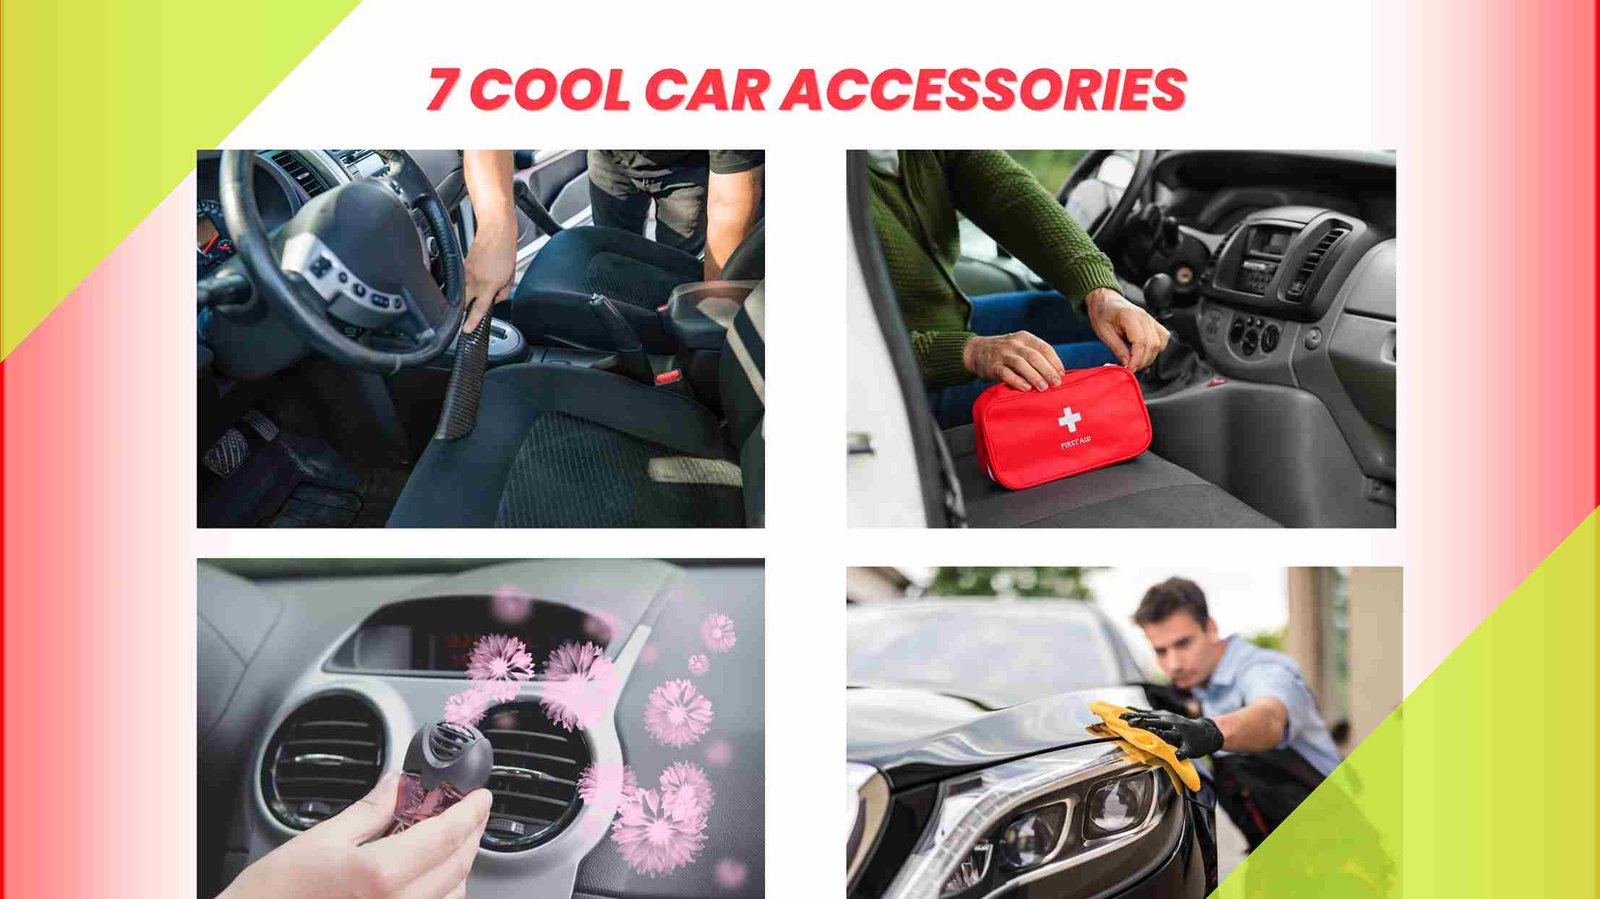 Car Accessories - Affordable & Cool